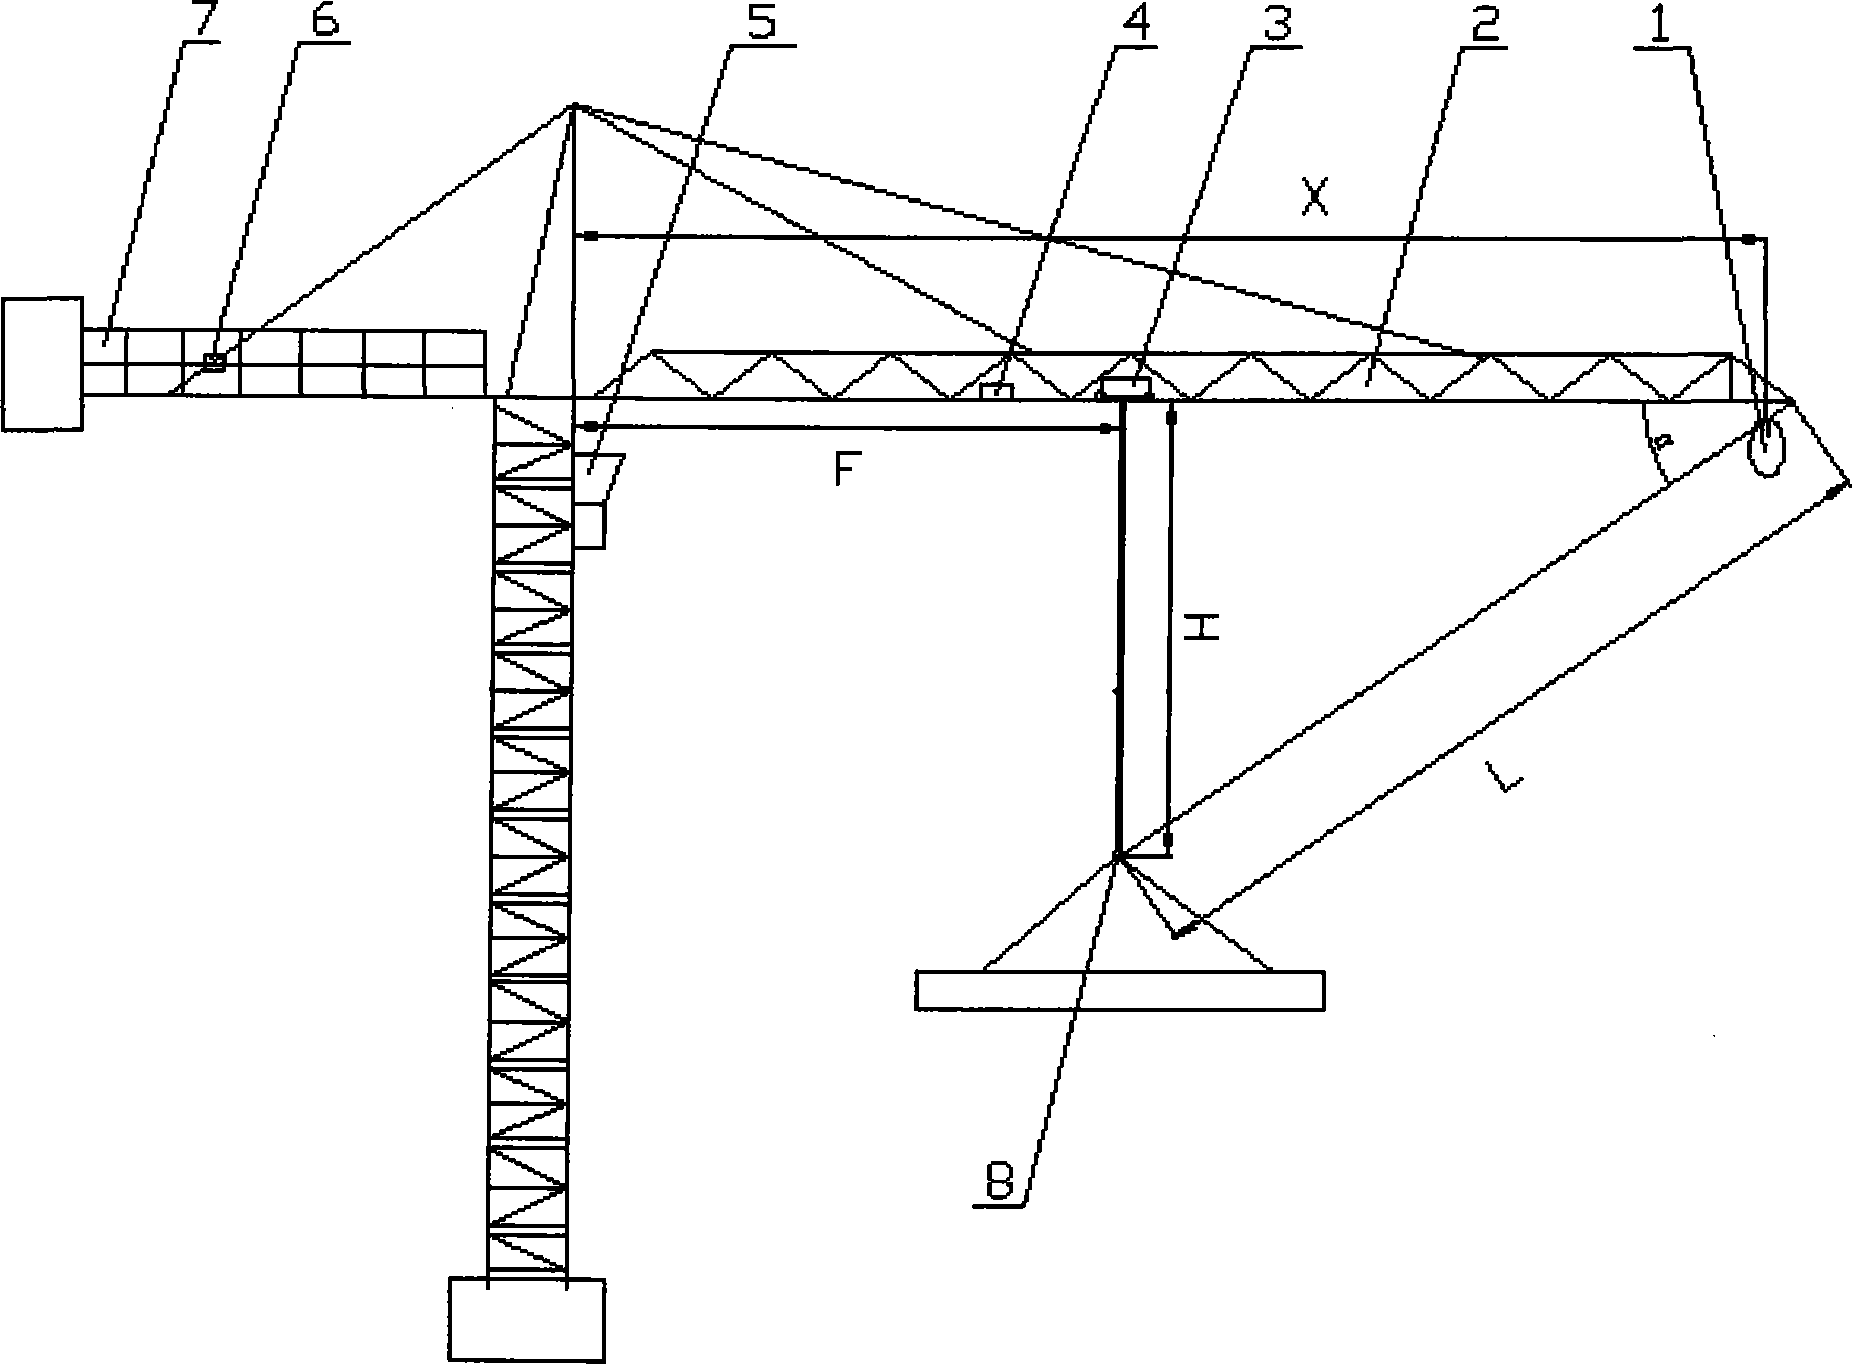 Automatic guiding system and method of tower crane